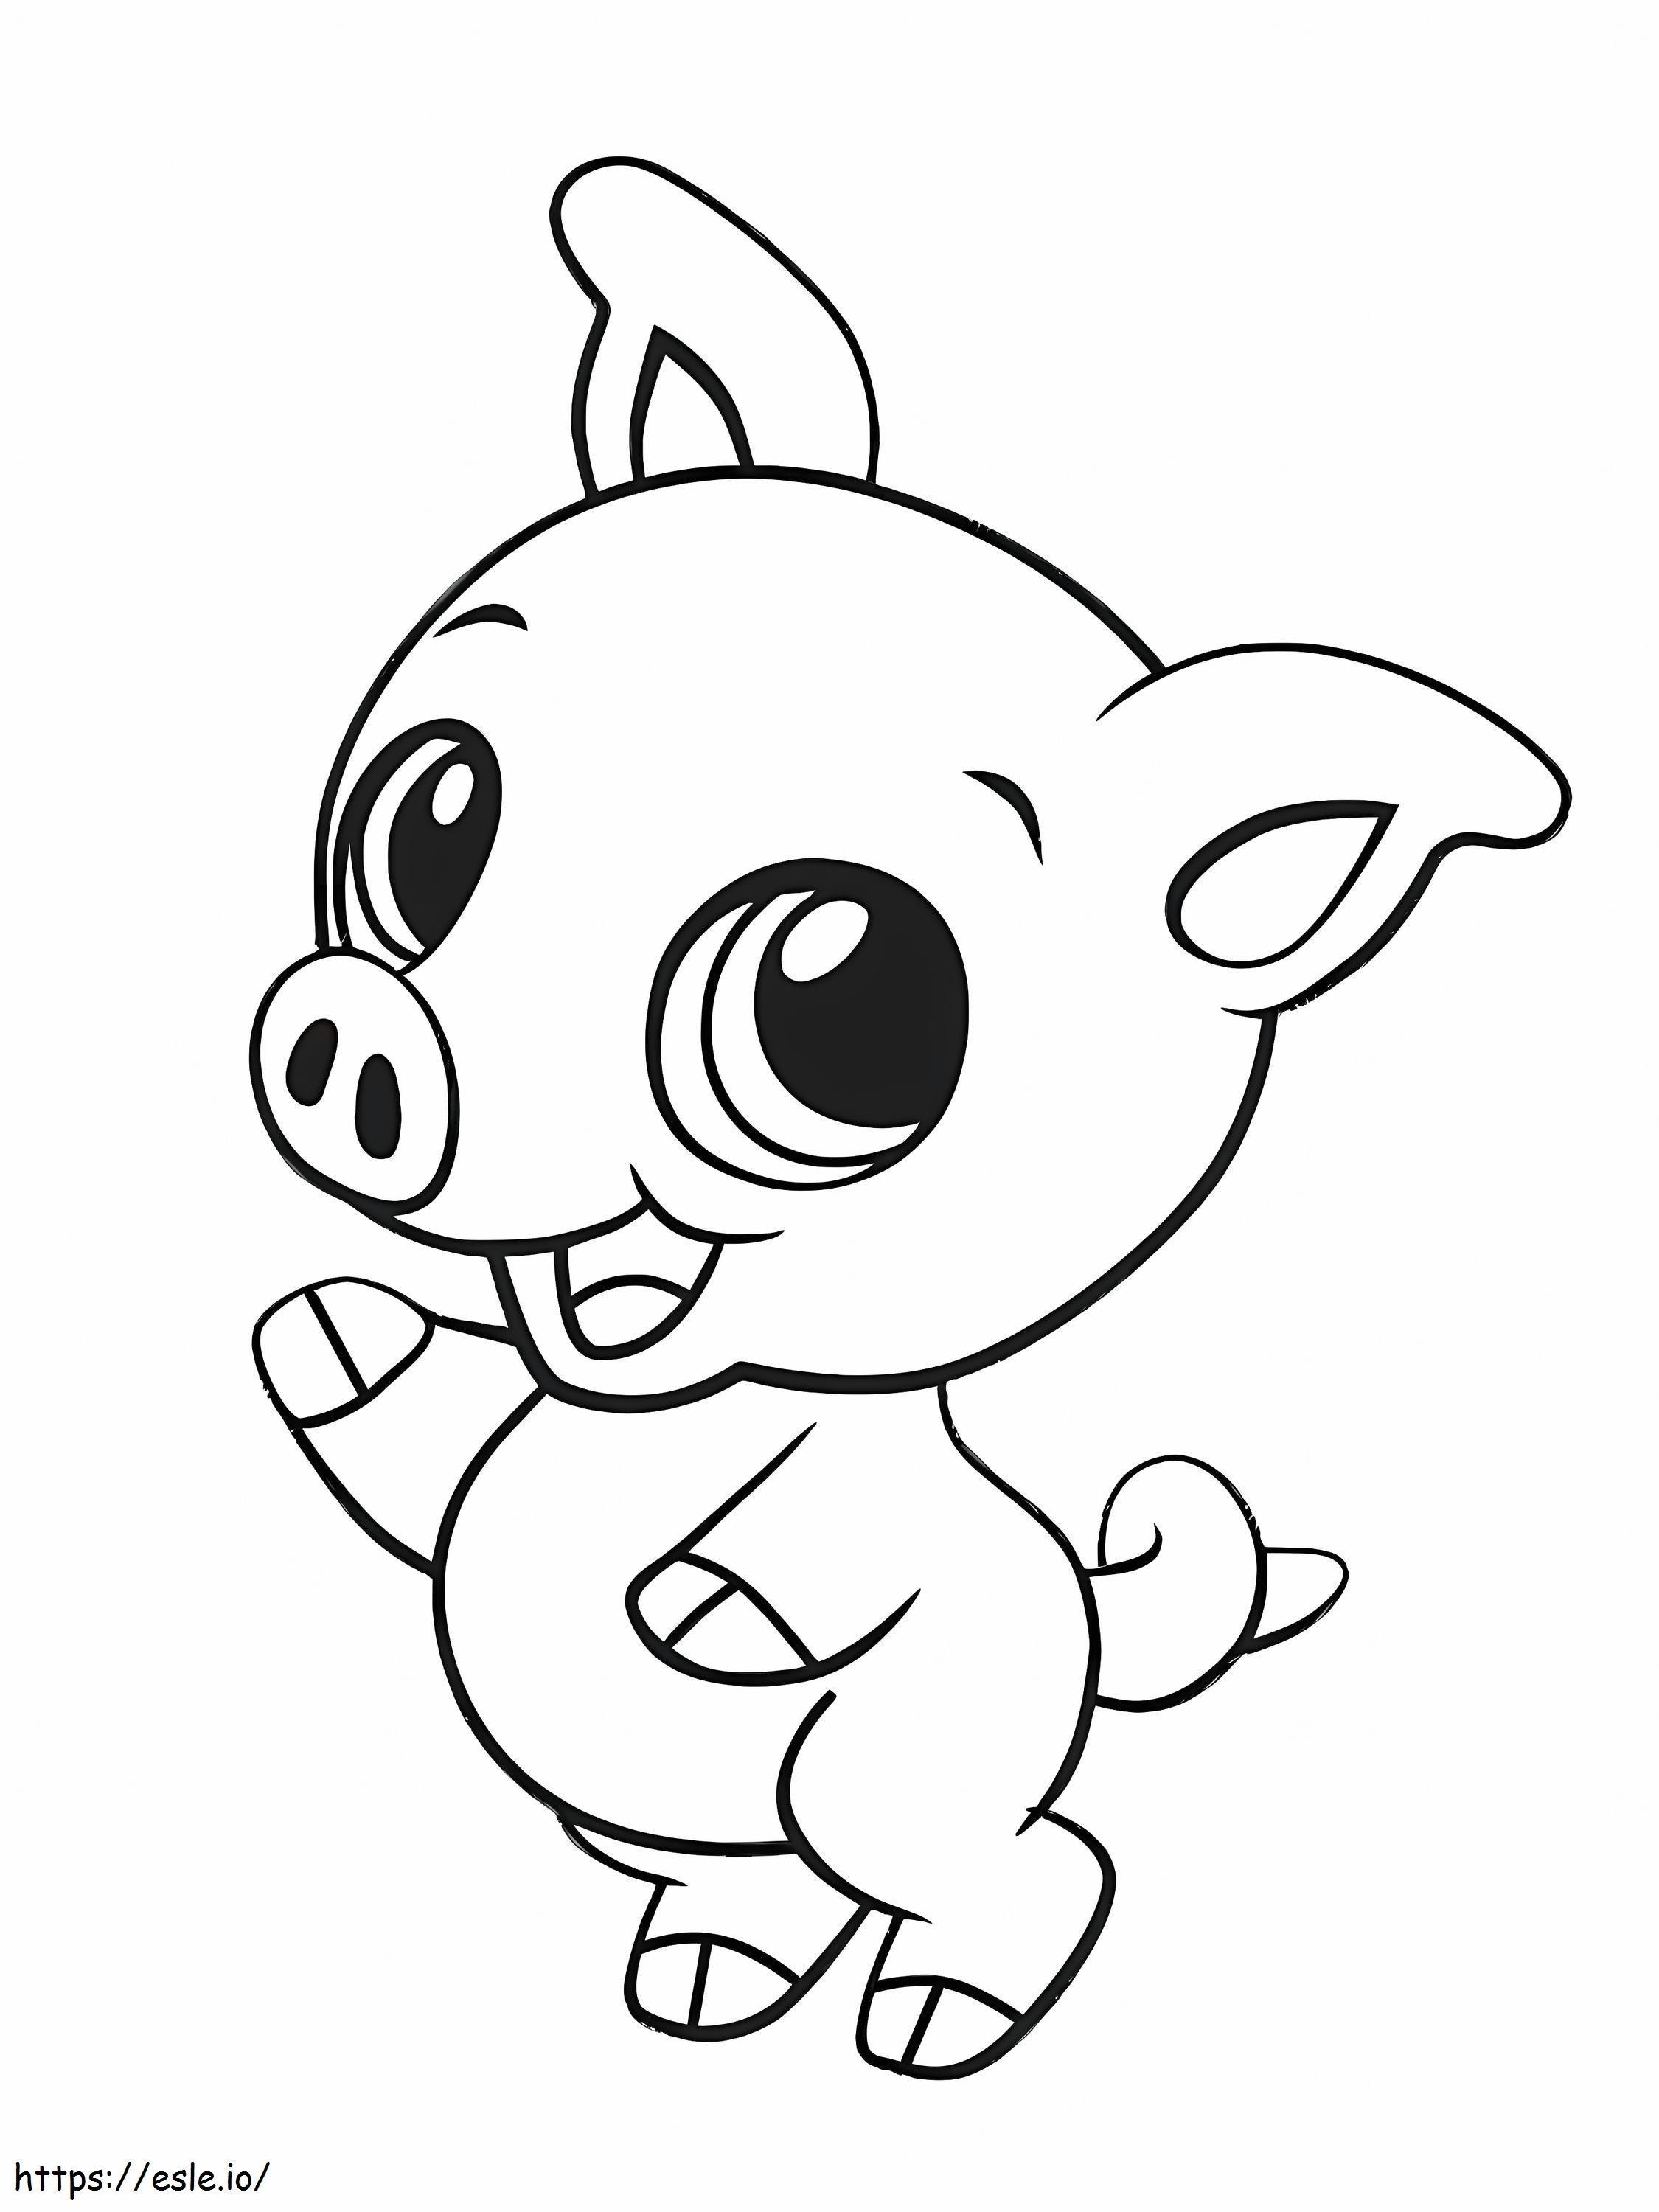 Baby Pig coloring page